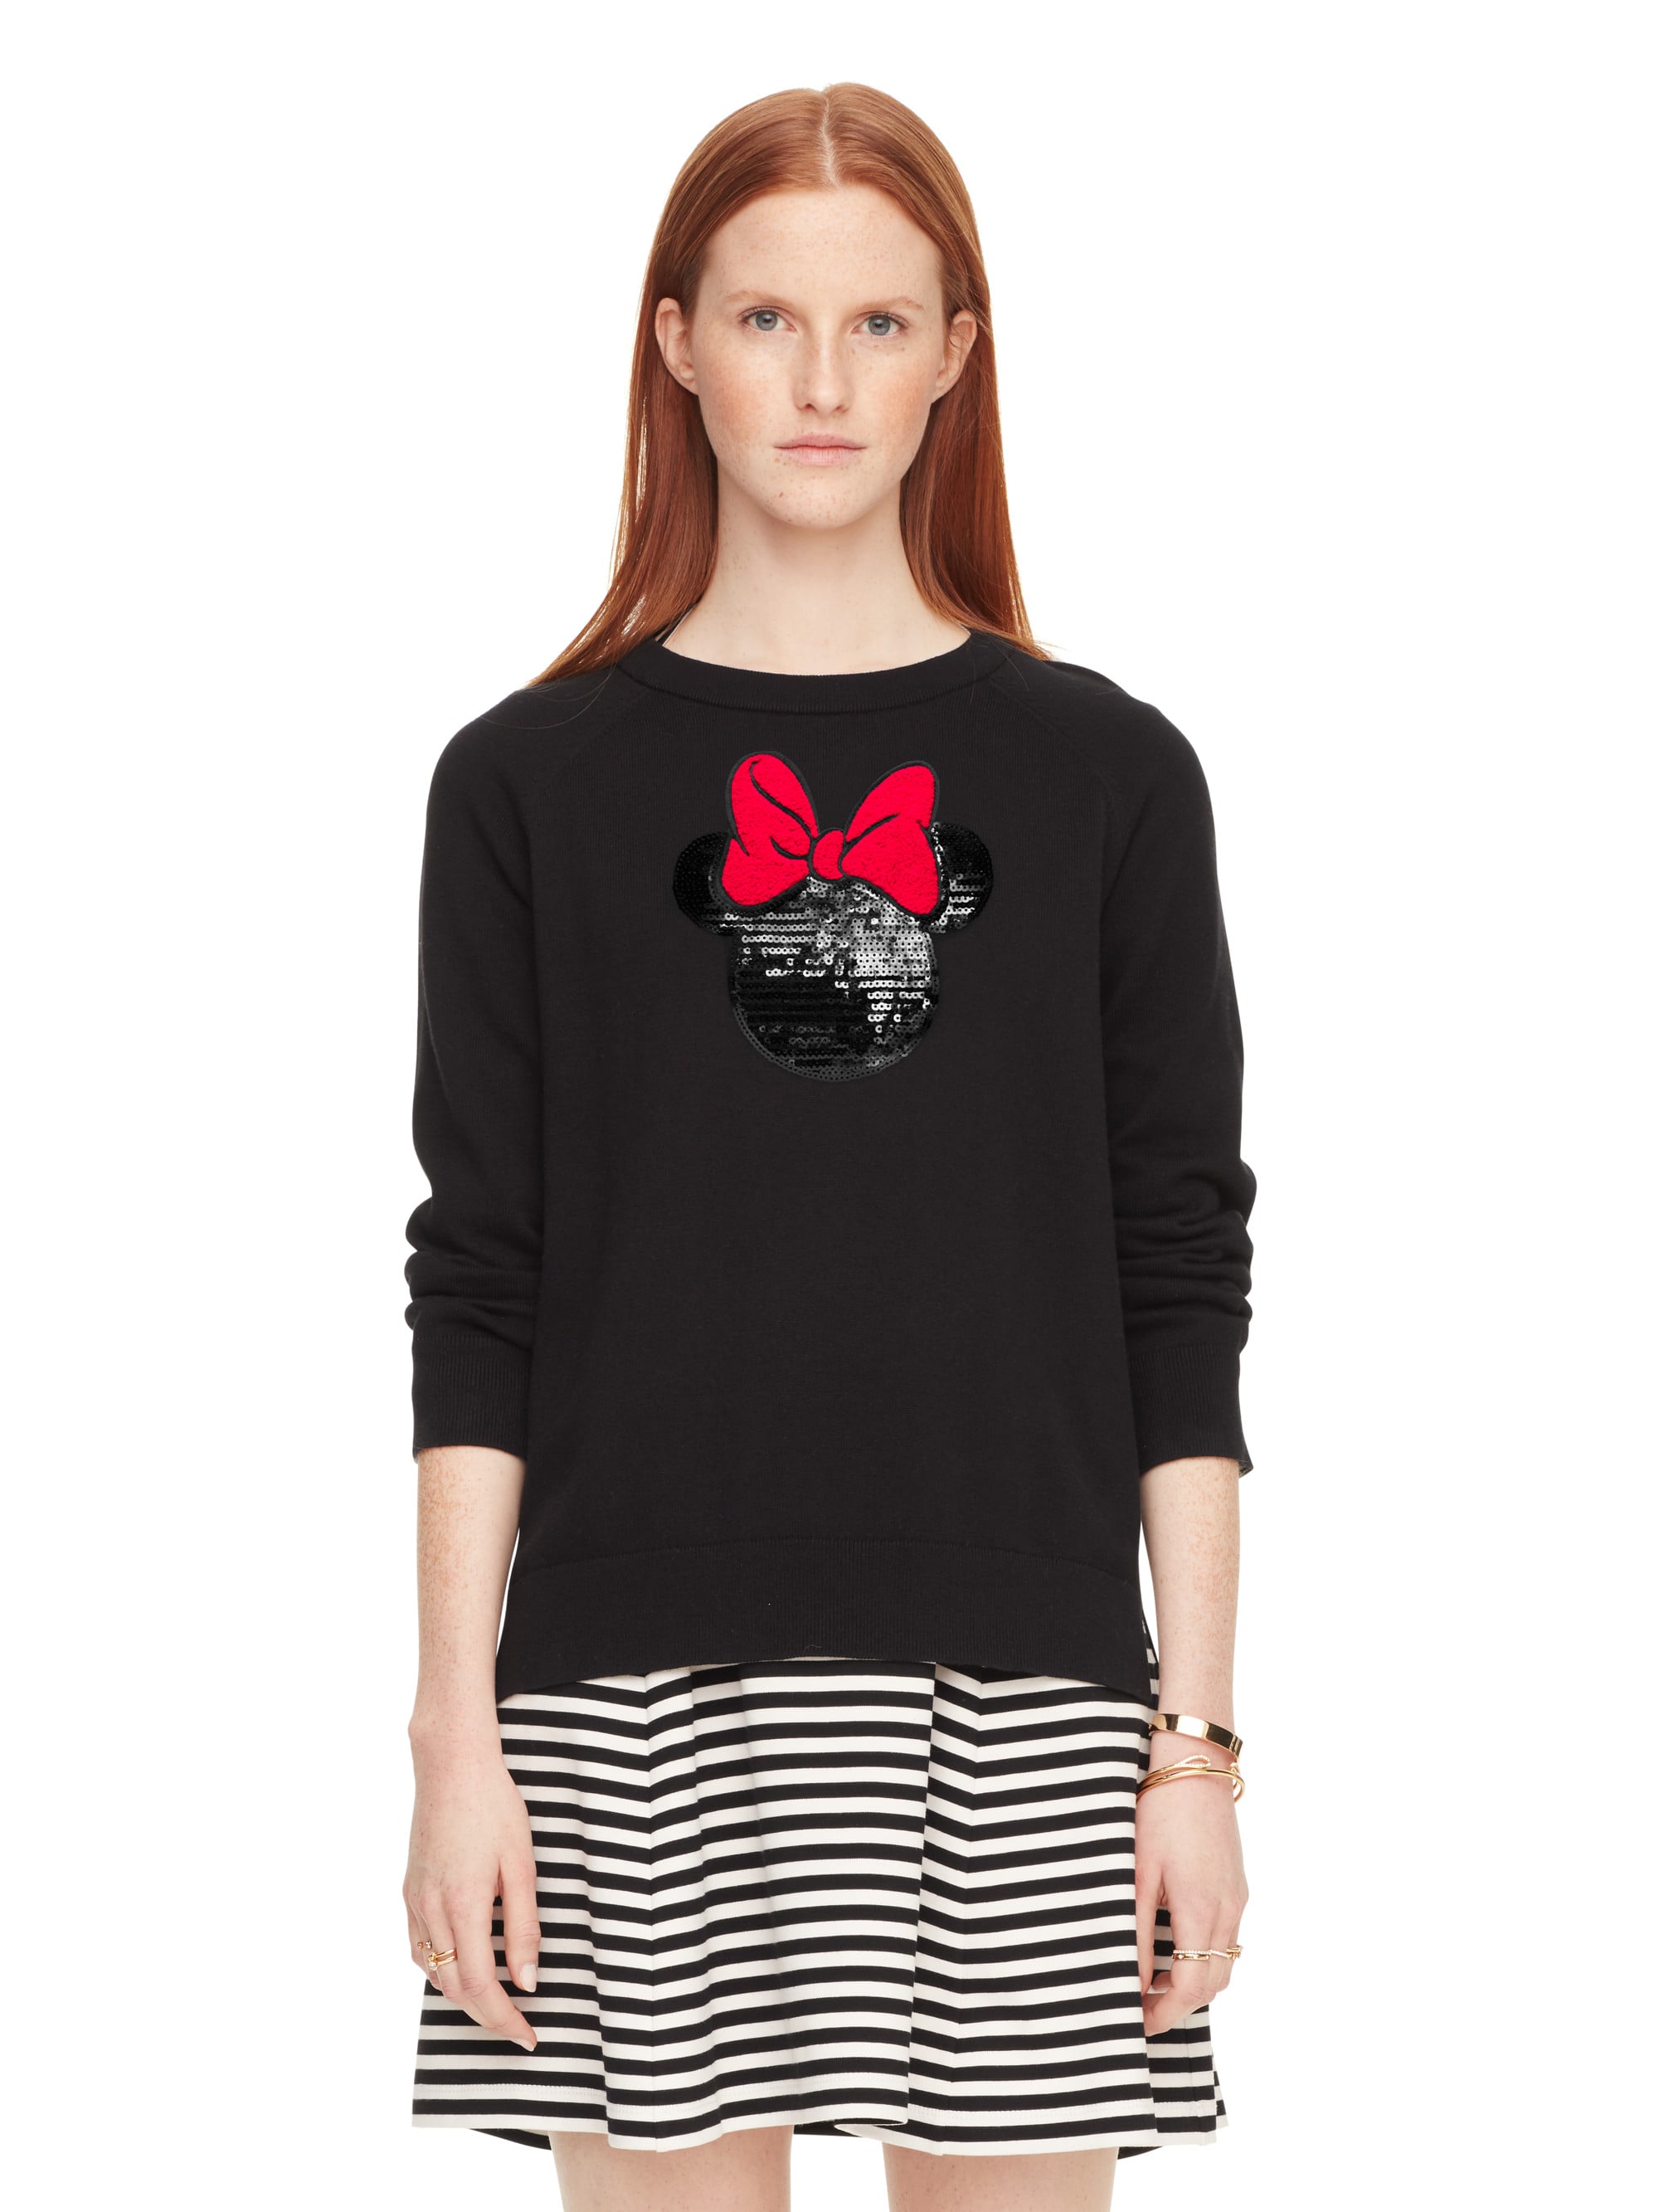 Kate Spade Minnie Mouse Collection Spring 2016 | POPSUGAR Fashion